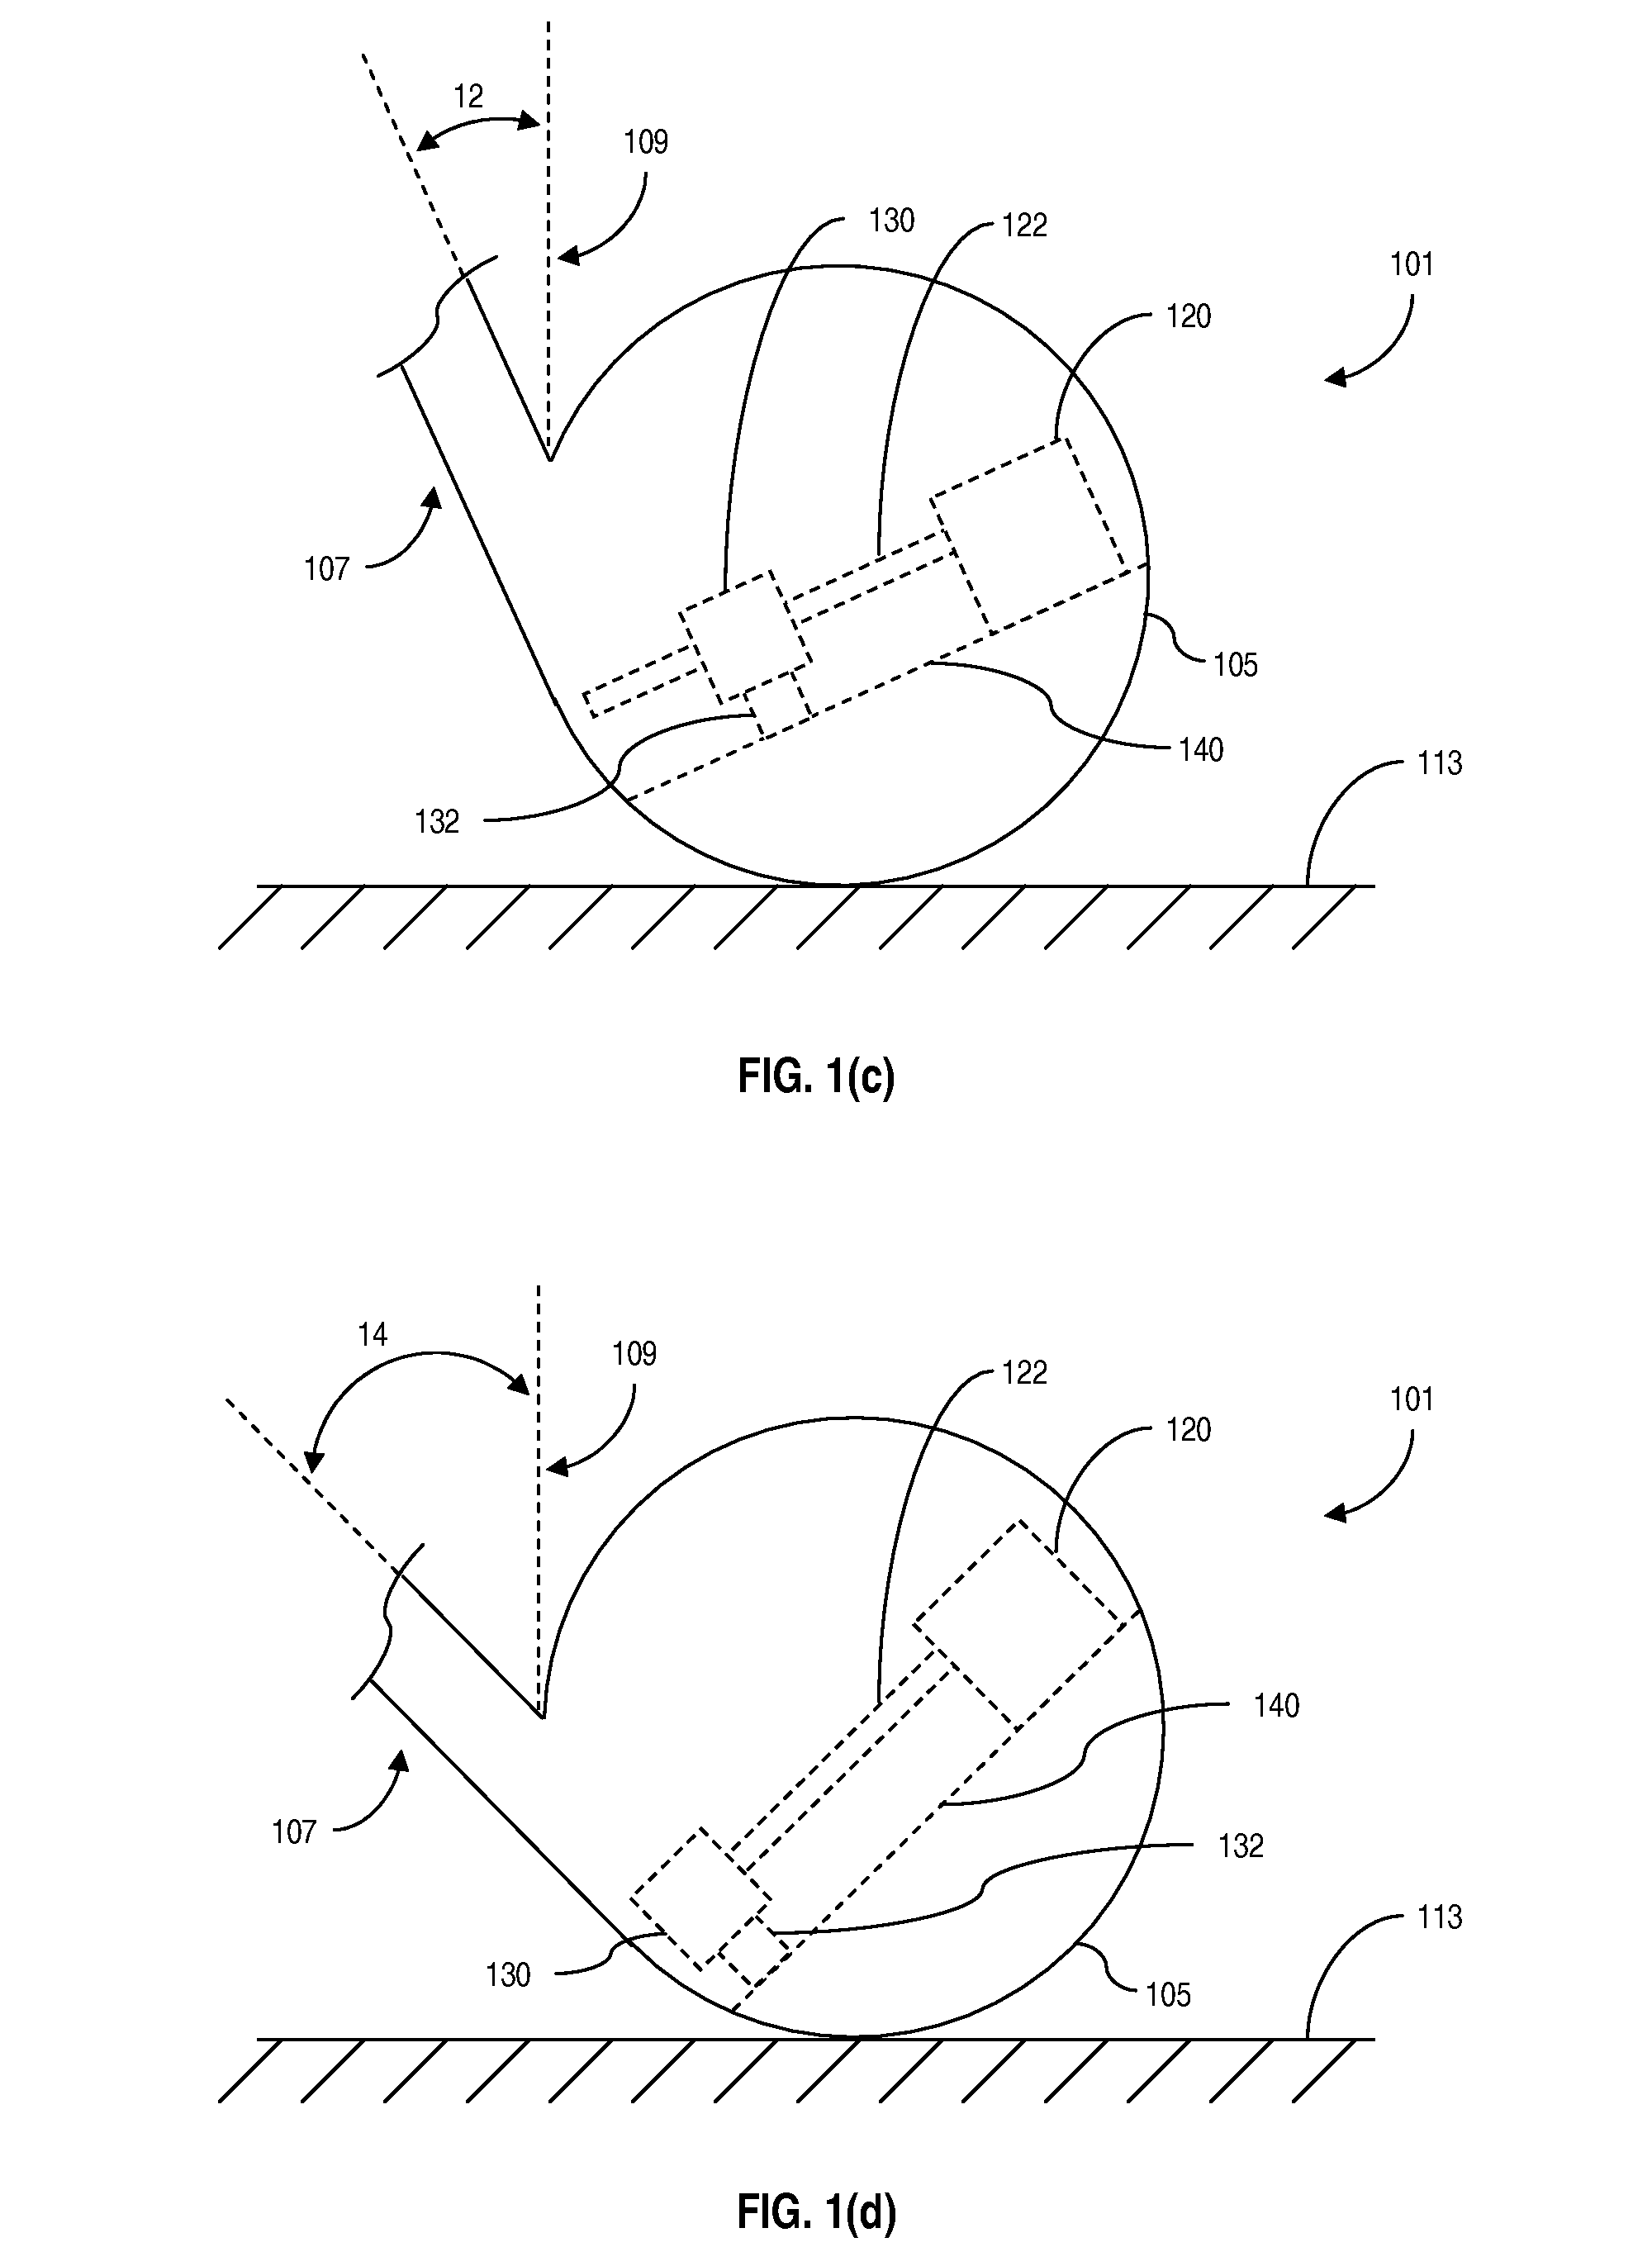 Touchless control of a control device